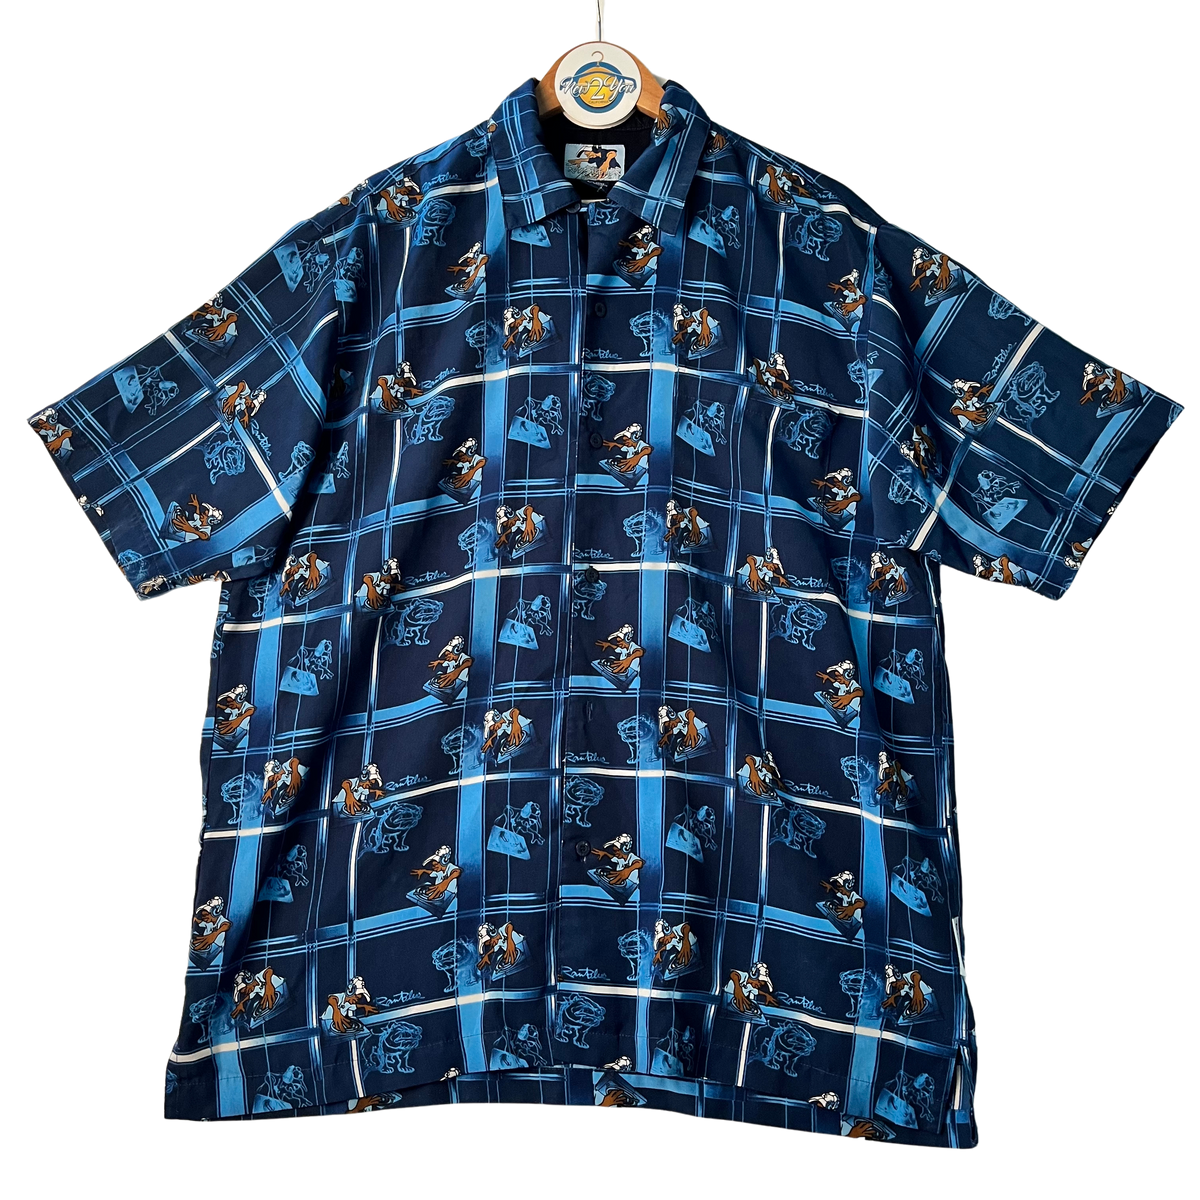 Raw Blue ABR DJ Casual Button Up